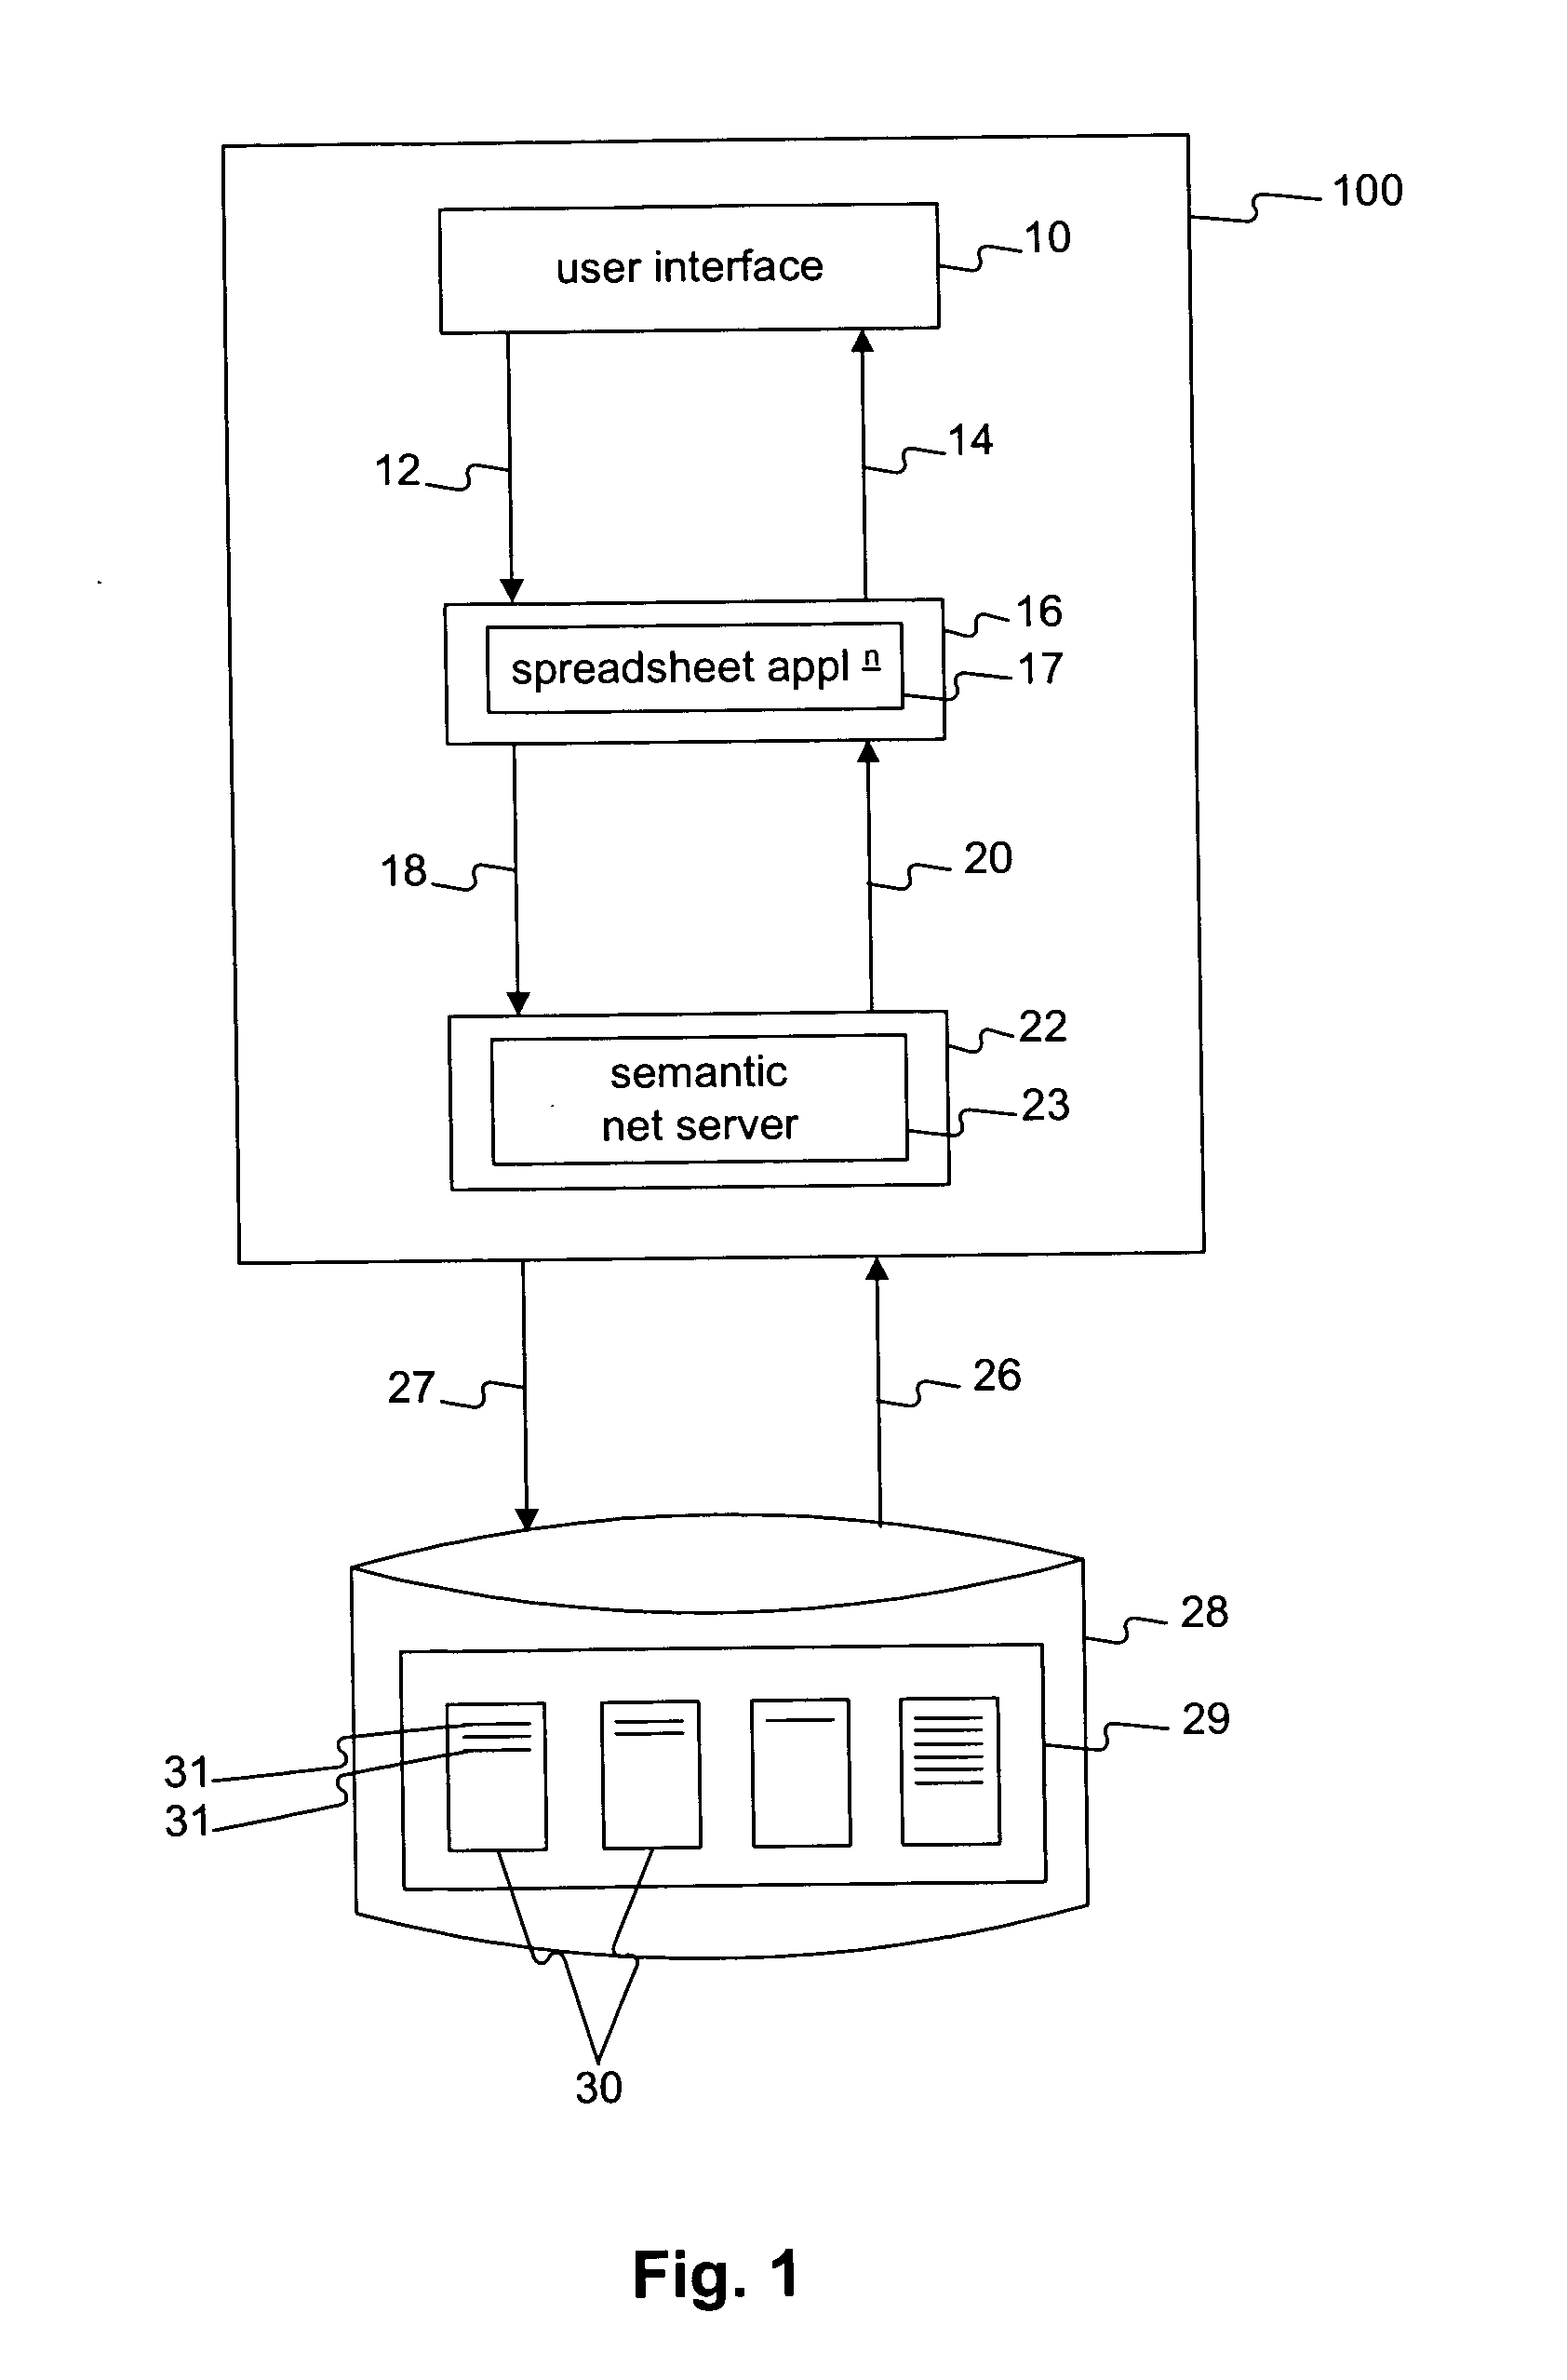 Database management systems and methods for managing a database